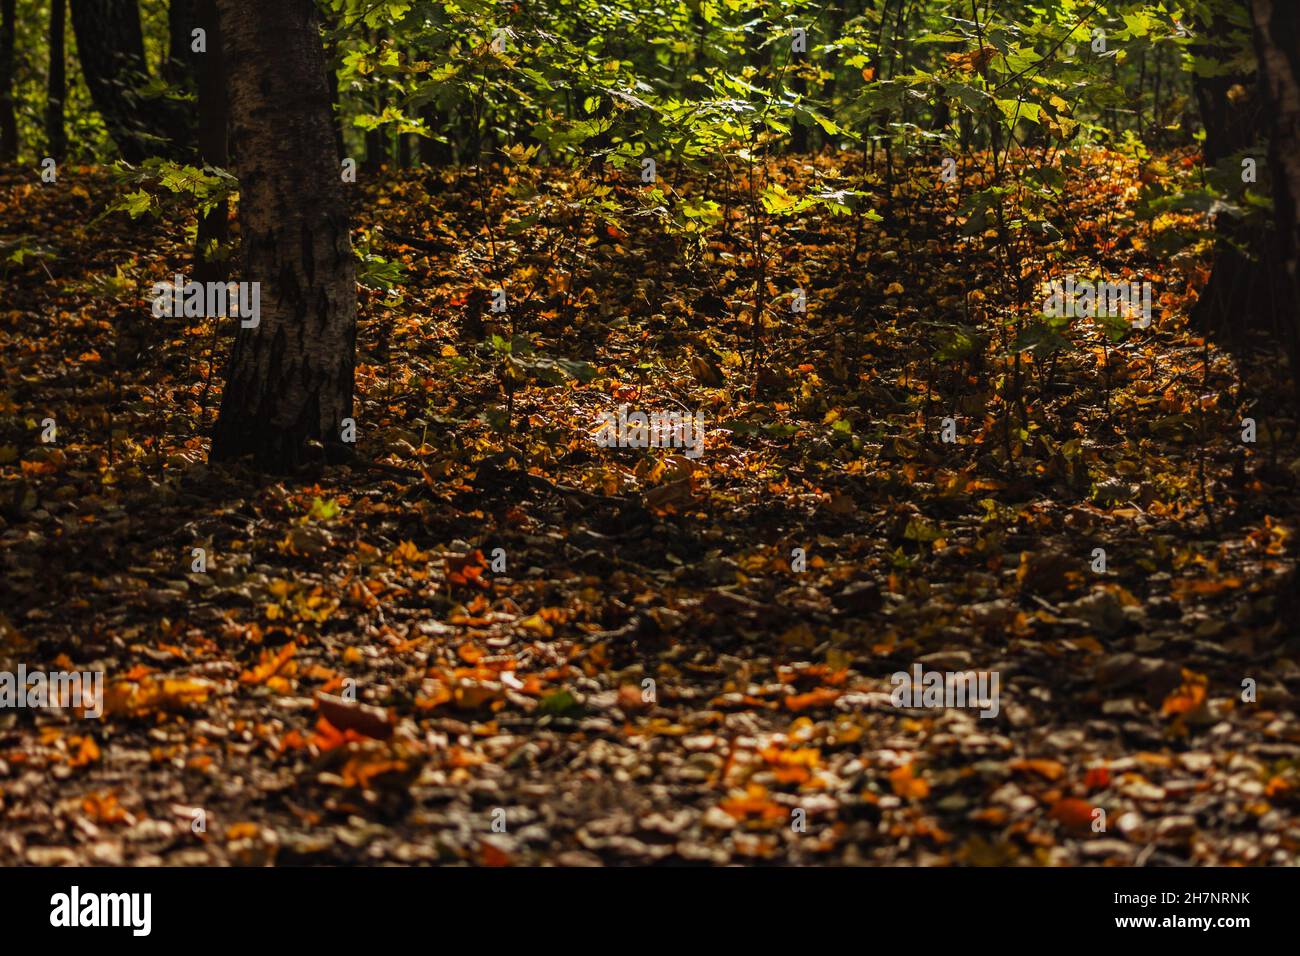 Real amazing gold of leaves in autumn forest at fall sunny day Stock Photo